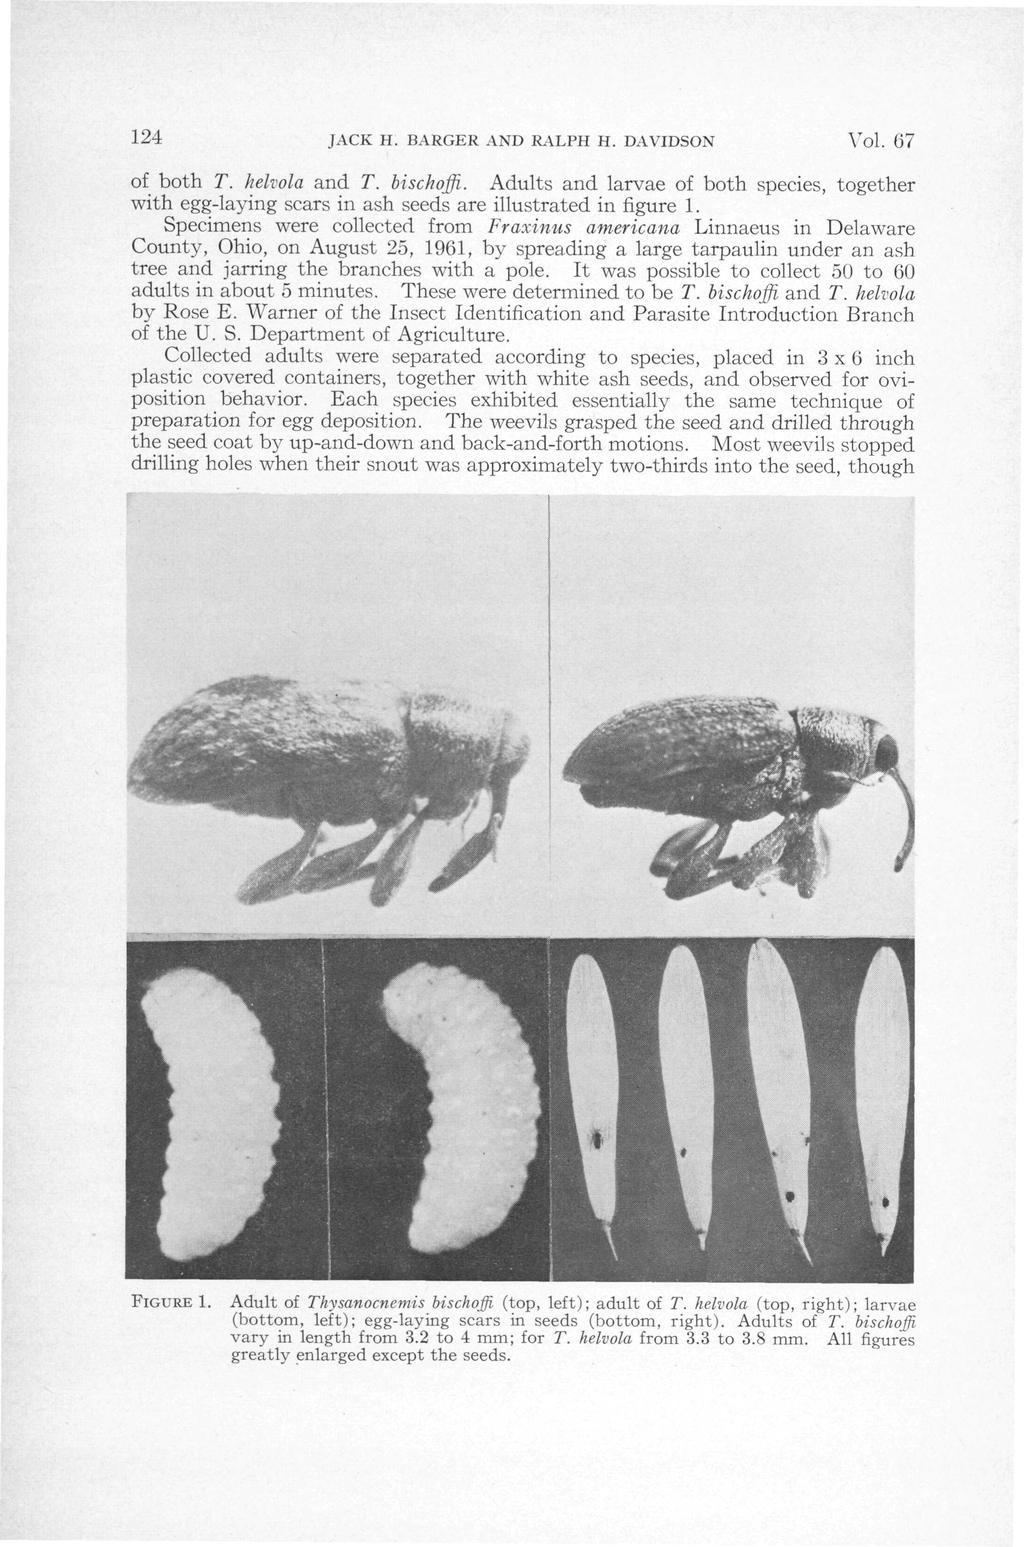 124 JACK H. BARGER AND RALPH H. DAVIDSON of both T. hefrola and T. bischoffi. Adults and larvae of both species, together with egg-laying scars in ash seeds are illustrated in figure 1.